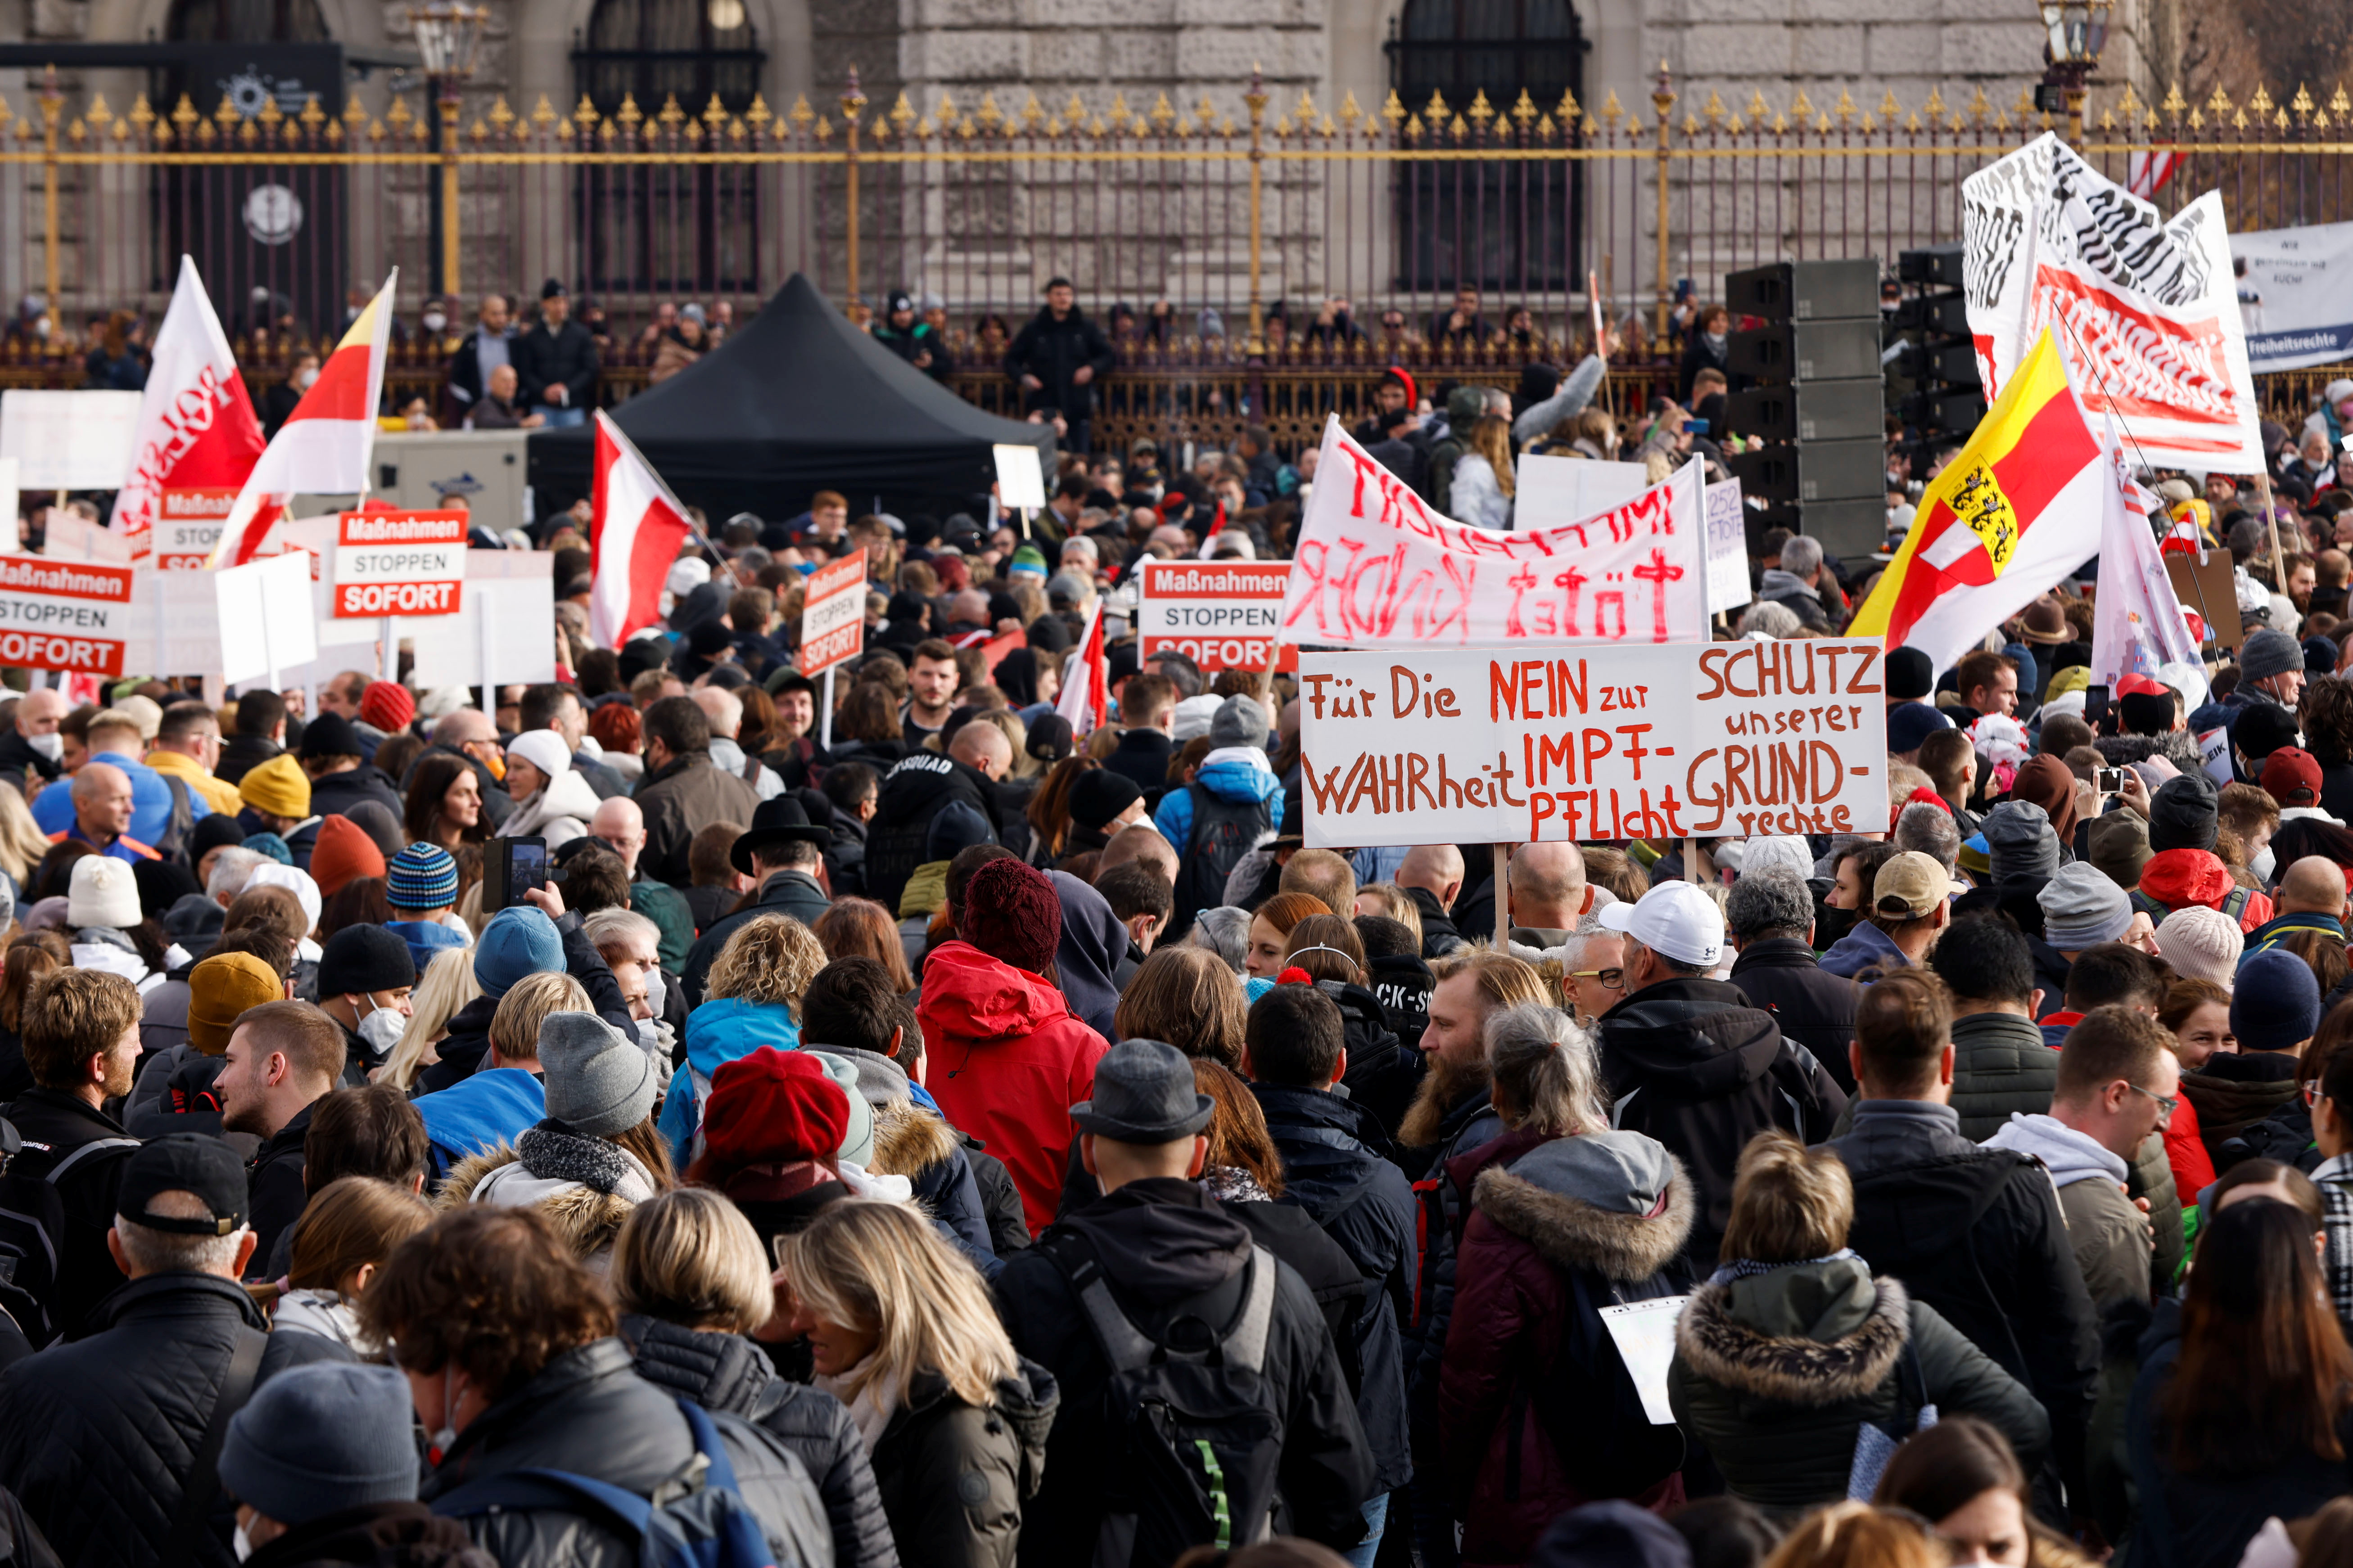 Demonstrators hold flags and placards as they gather to protest against the coronavirus disease (COVID-19) measures in Vienna, Austria, November 20, 2021. The placard reads: 